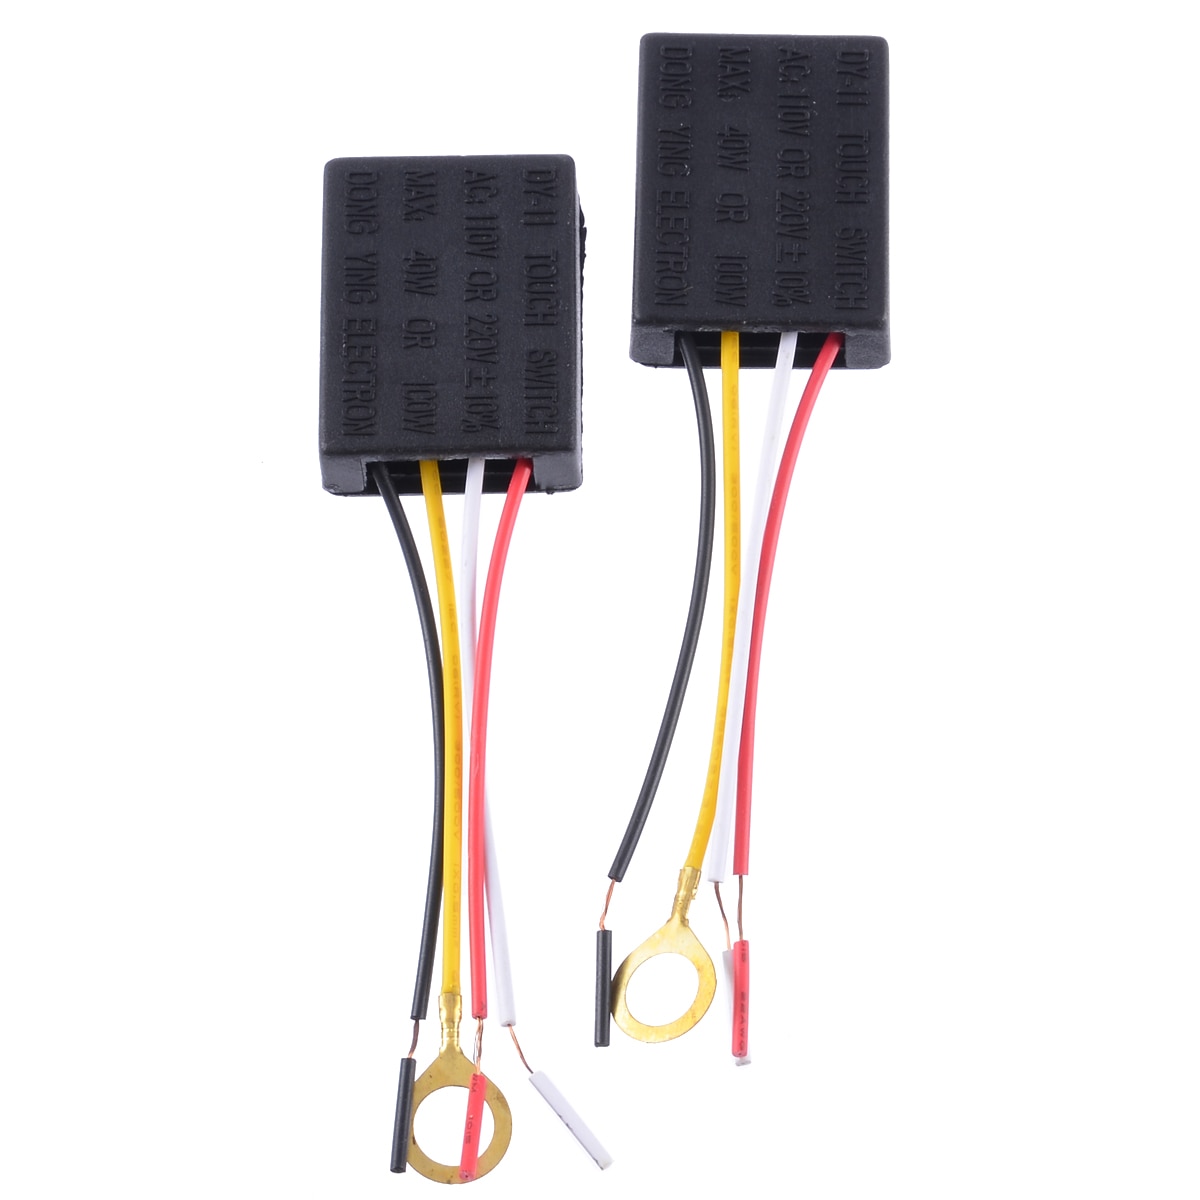 3-Way Touch Switch Sensors Pair